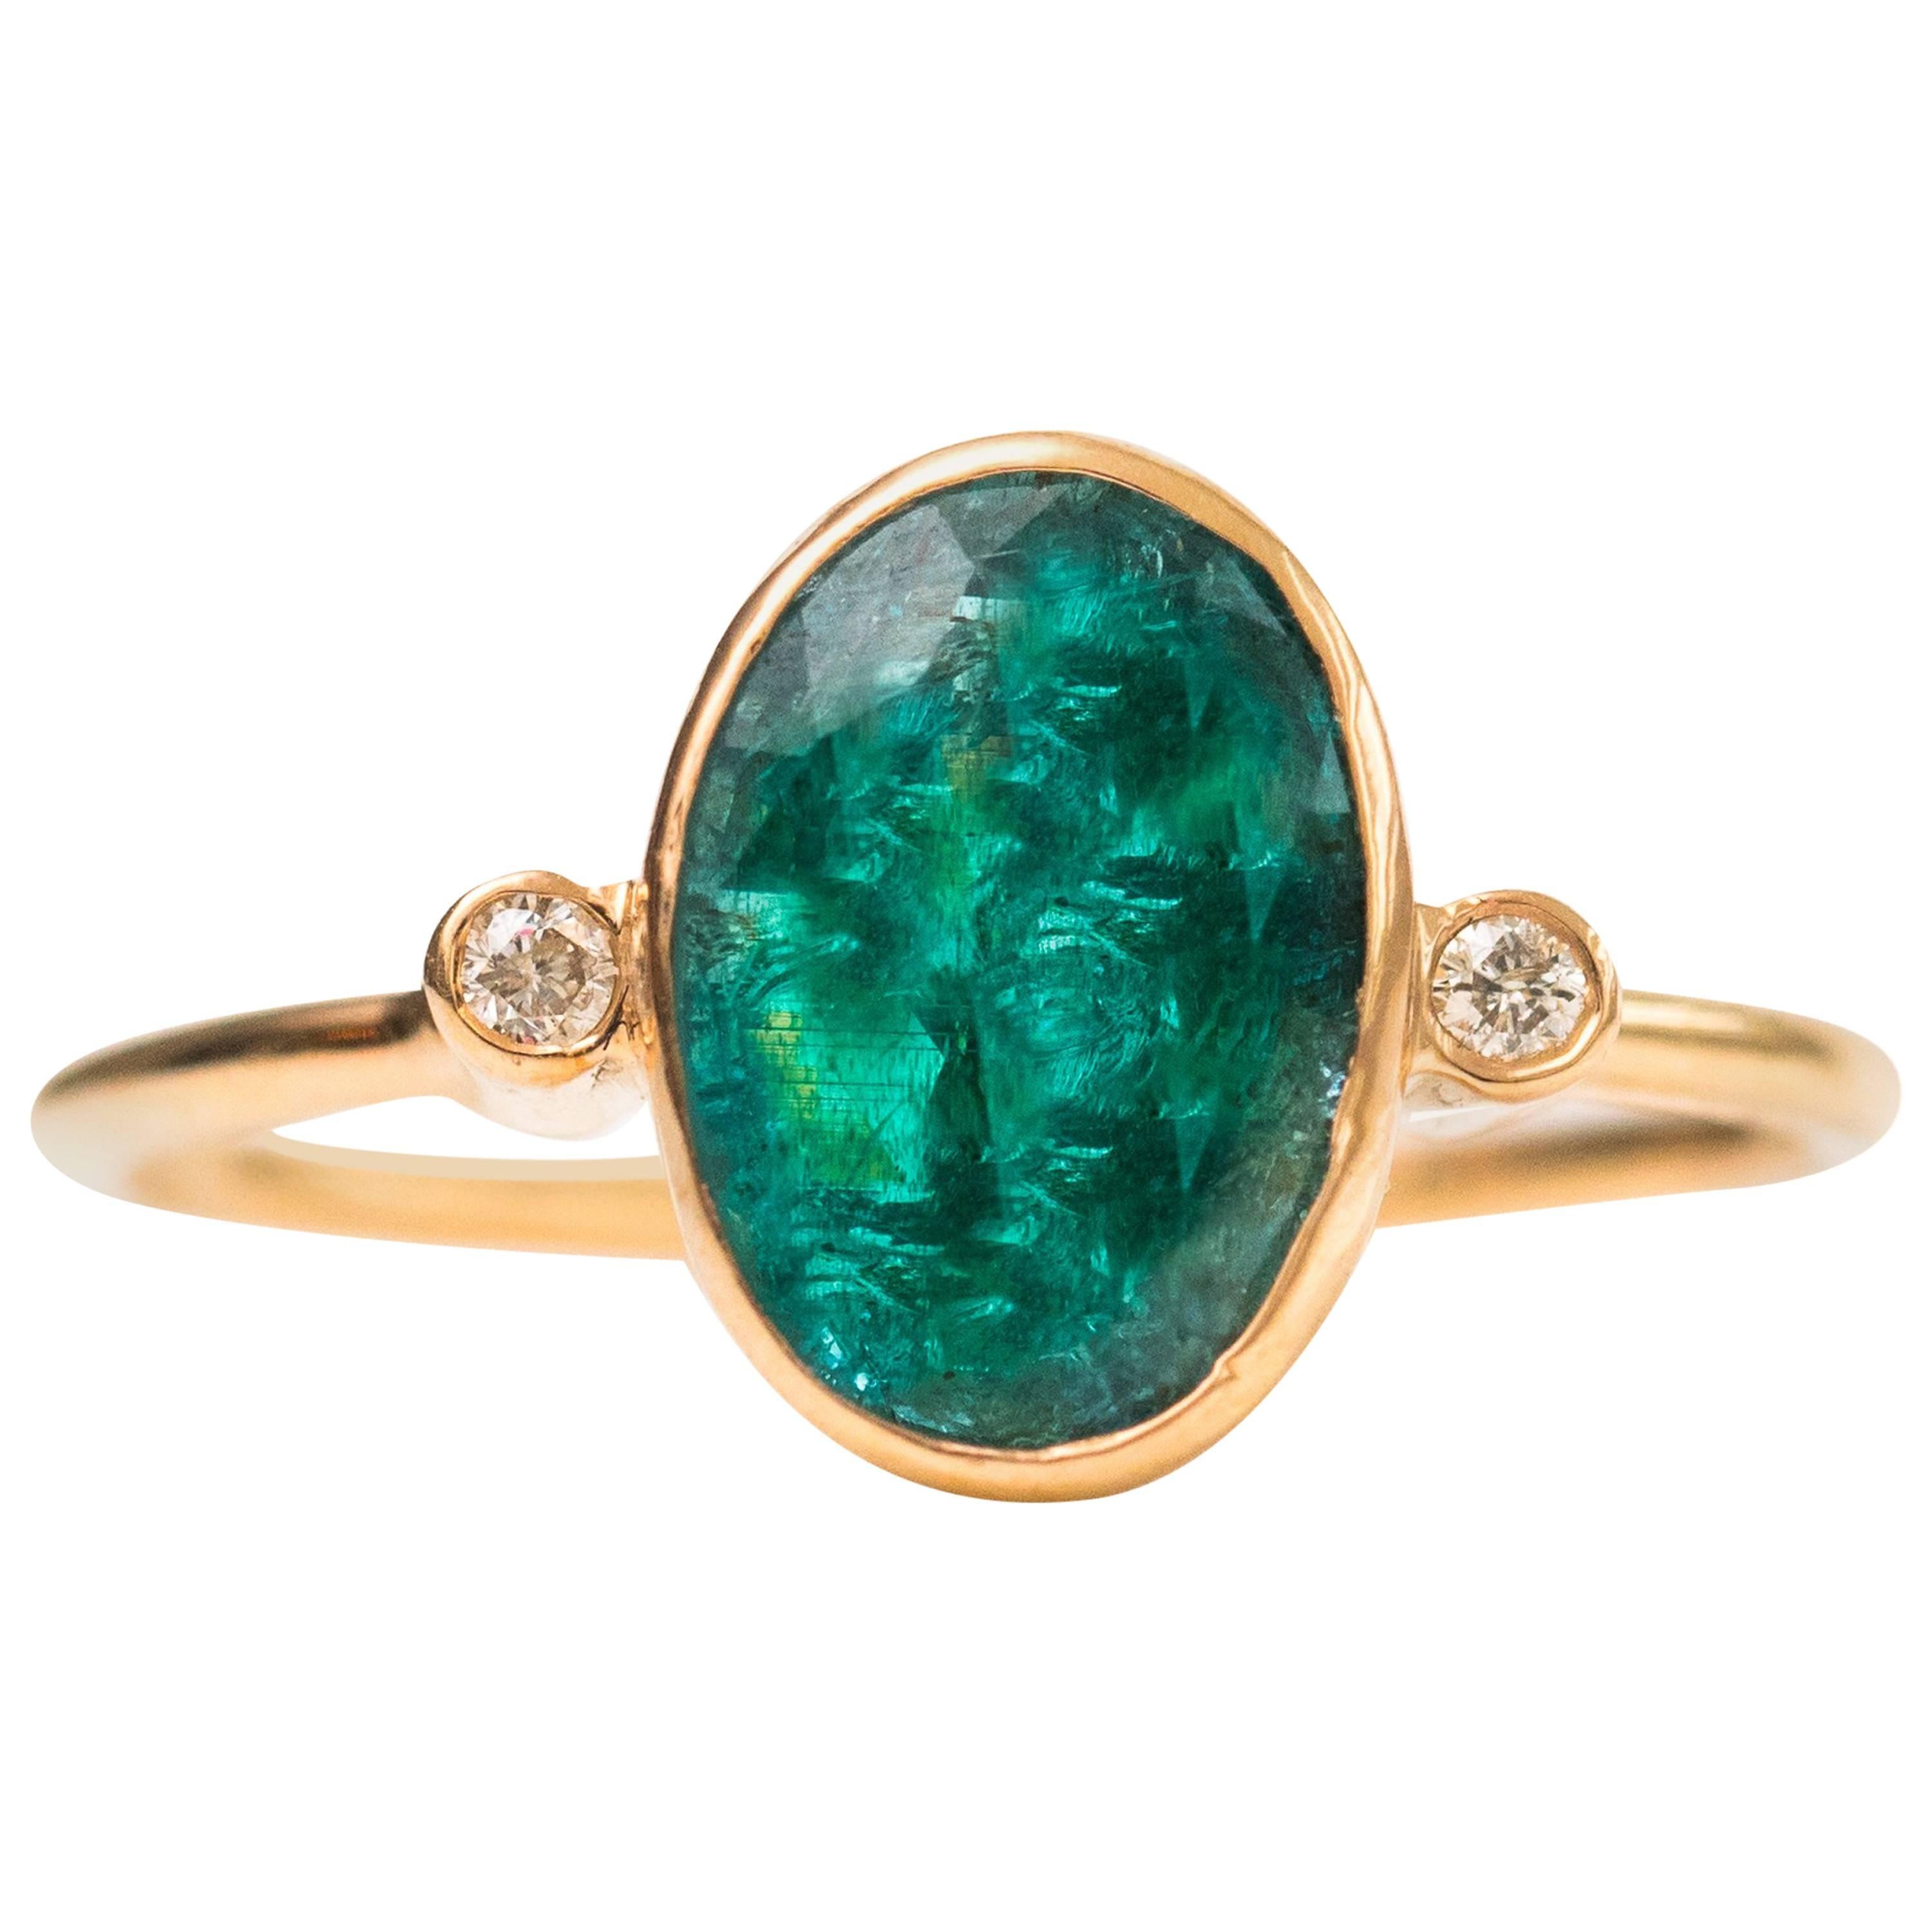 1.8 Carat Oval Emerald with Diamonds and 18 Karat Yellow Gold Ring